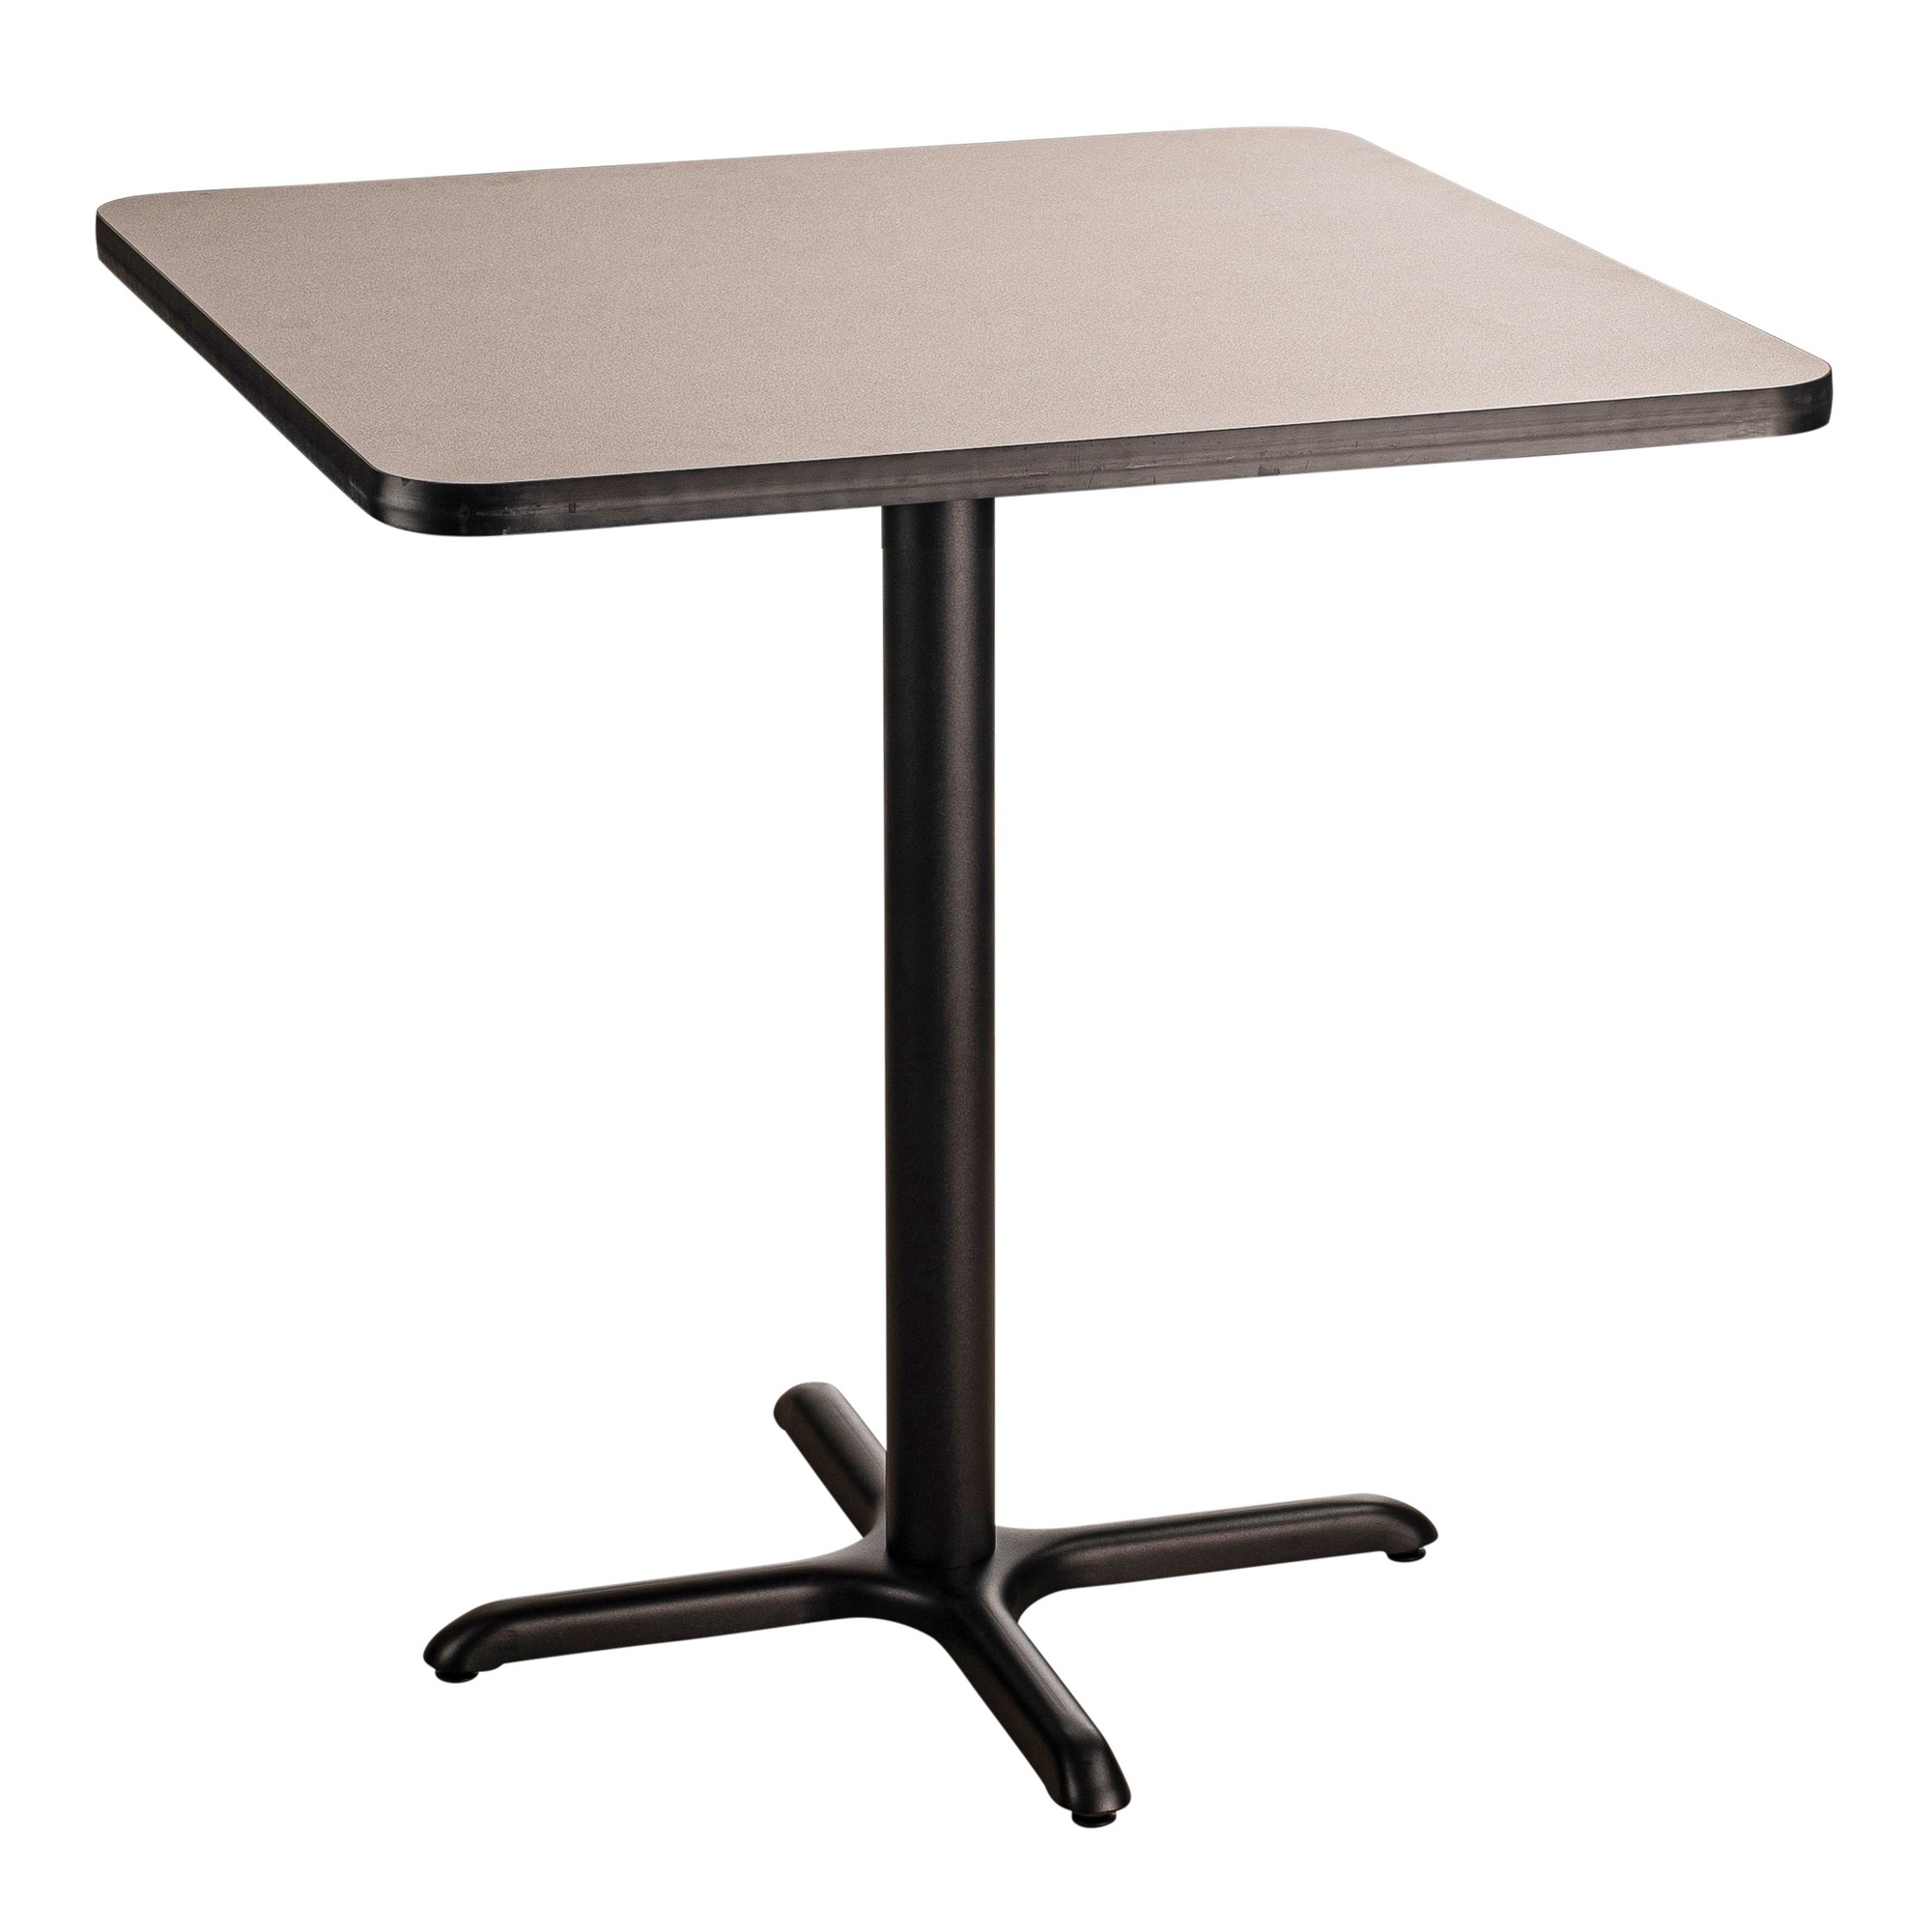 "National Public Seating, Cafe Table, 36x36x36 Square ""X"" Base, Height 36 in, Model CT33636XCPBTMGY"